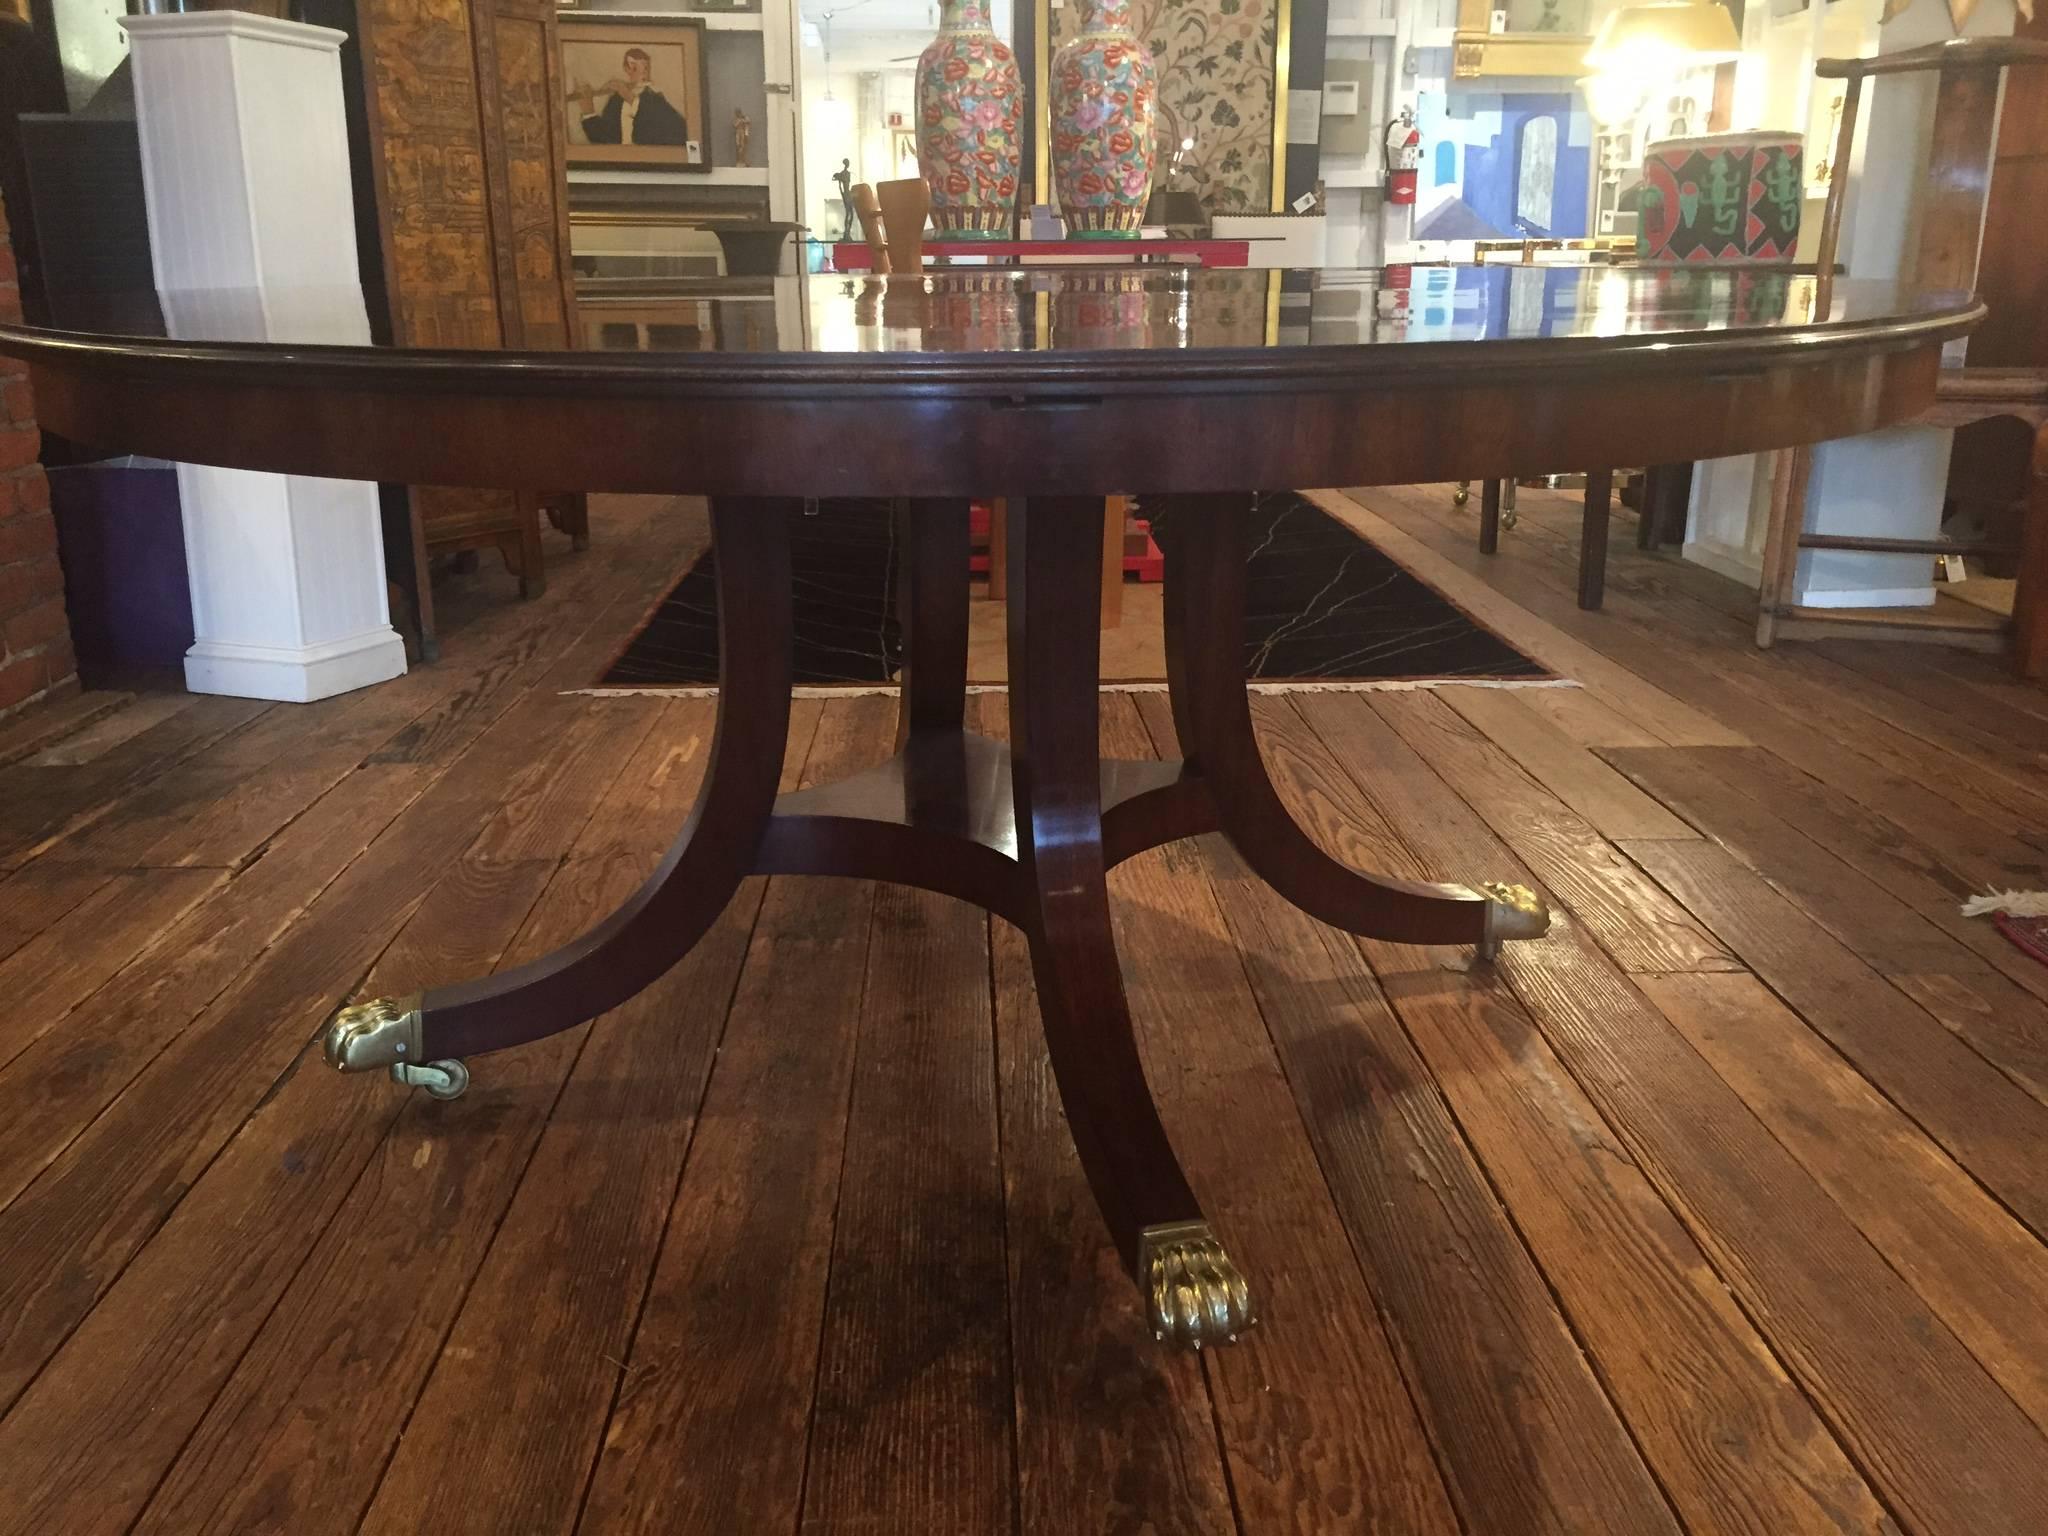 English Regal Enormous Round Mahogany Dining Table with Peripheral Leaves